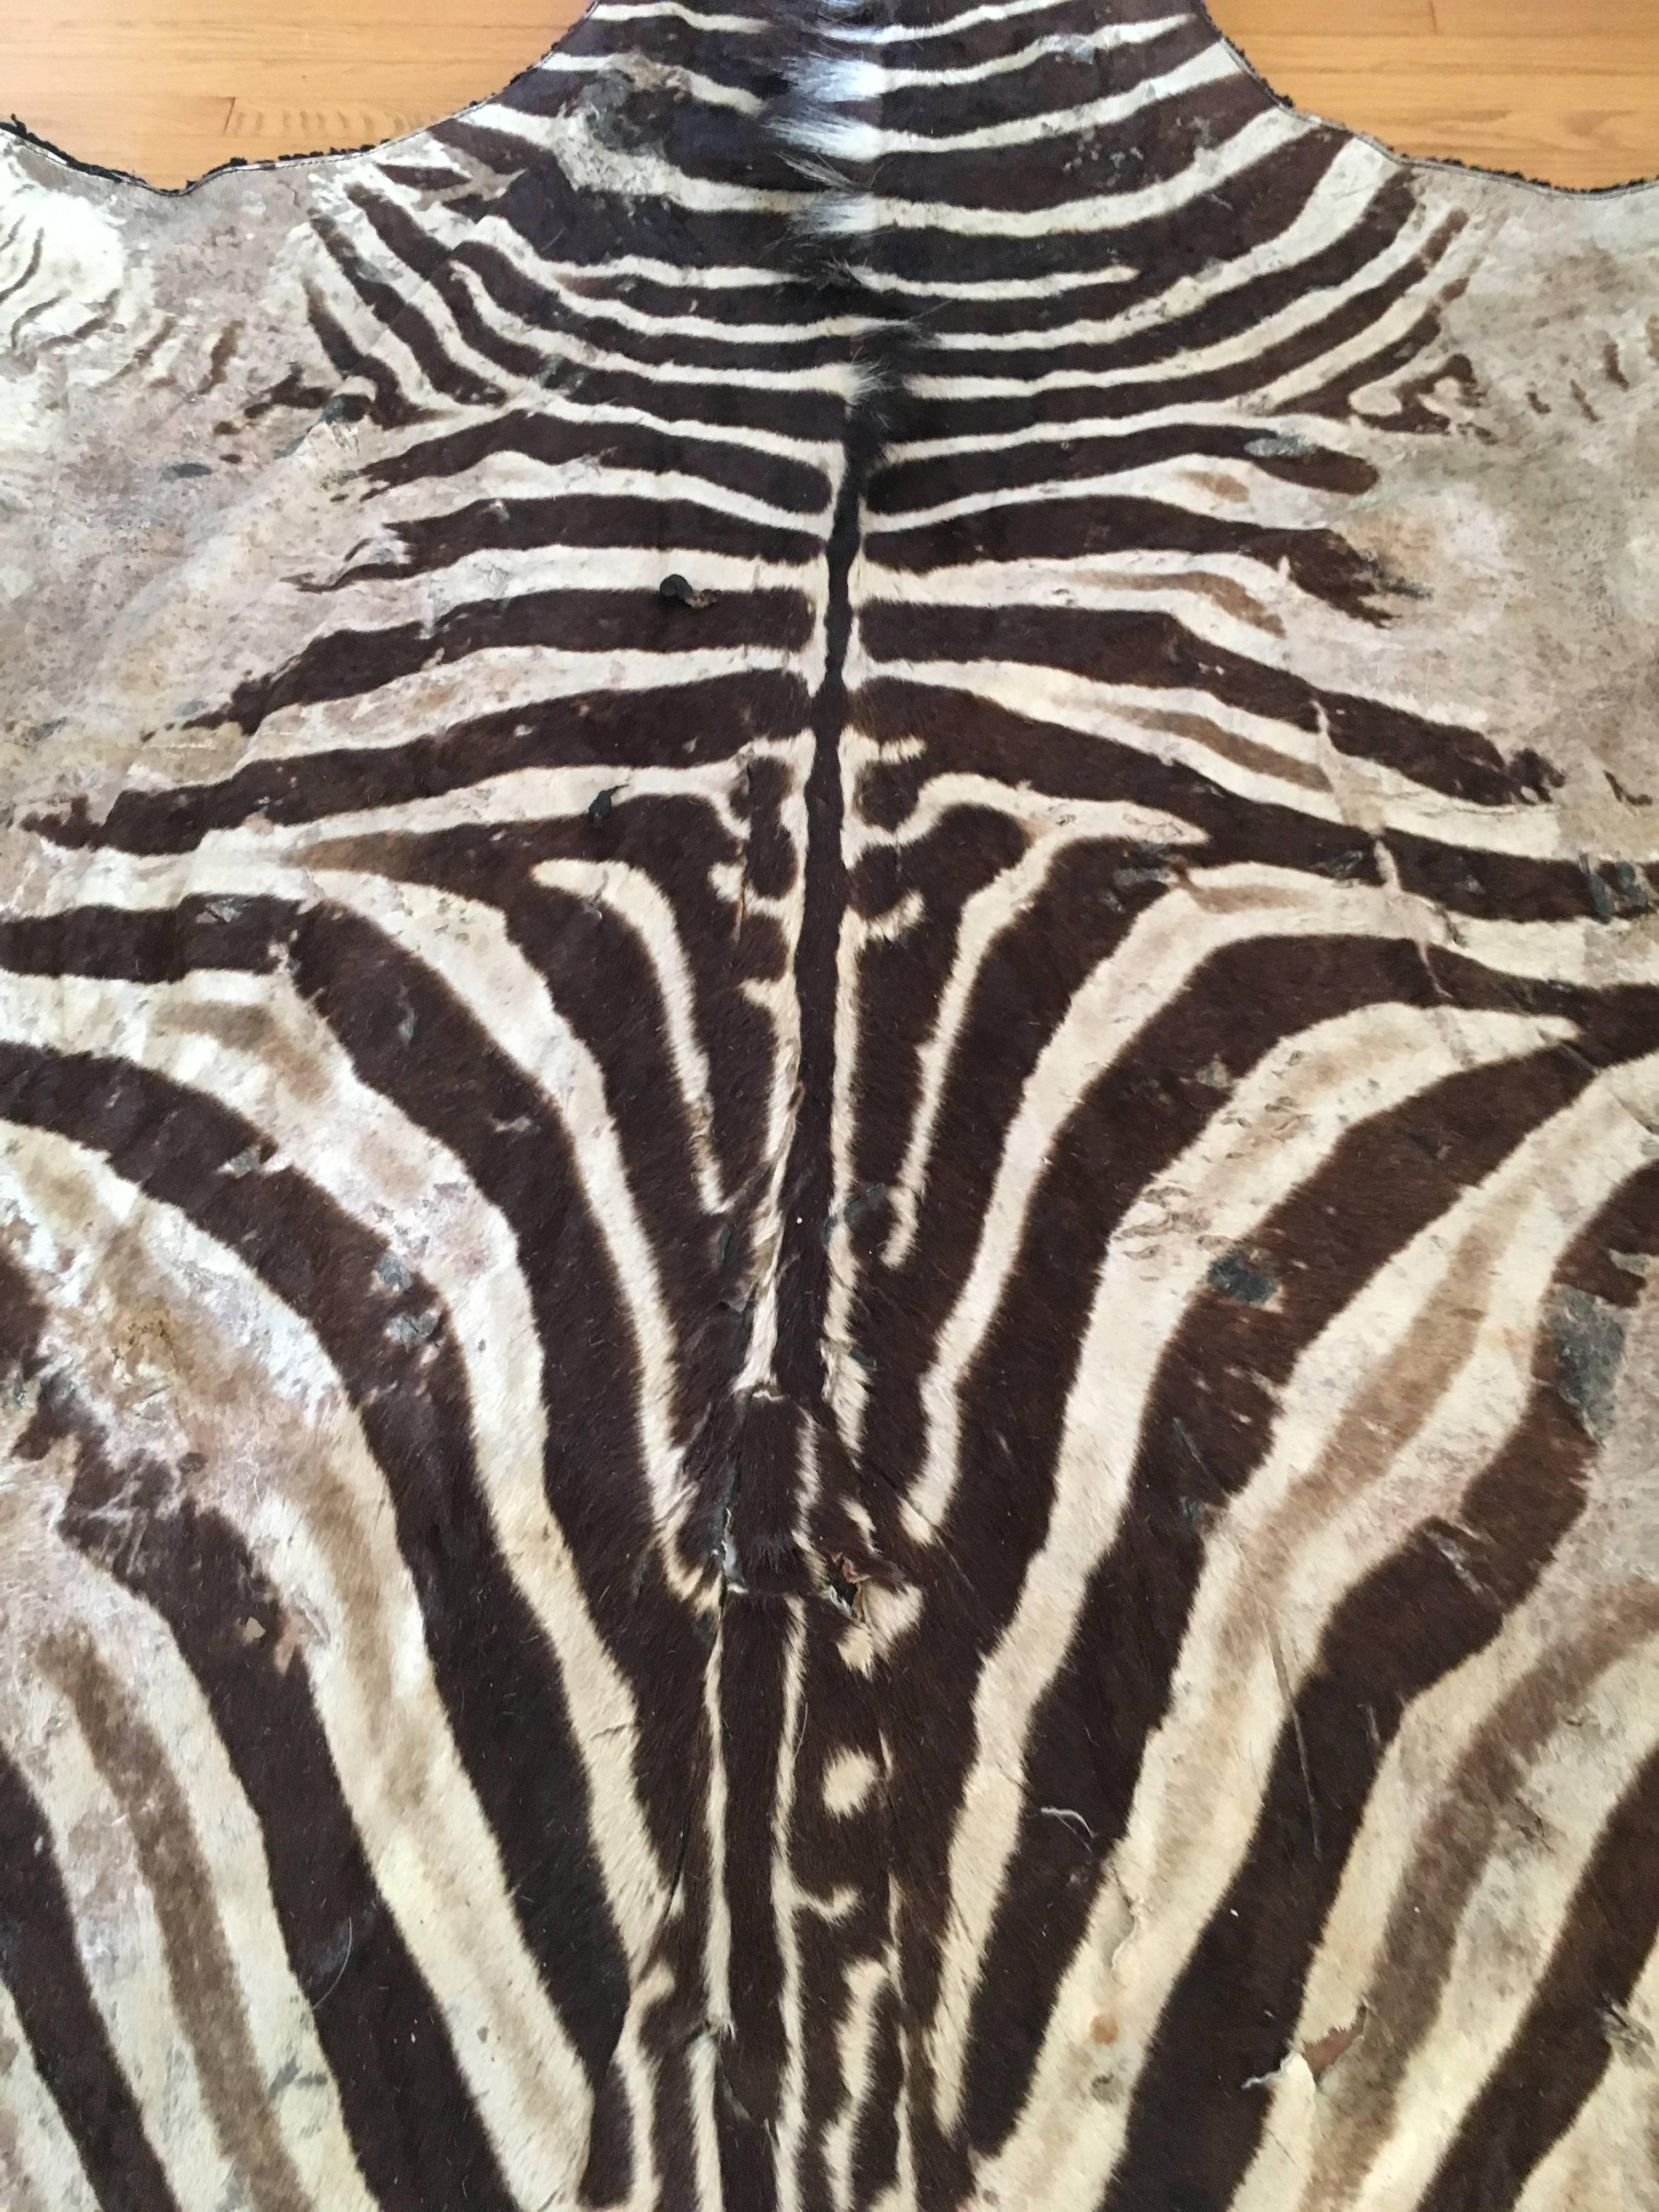 Vintage Authentic zebra hide rug - a perfect compliment to many rooms, mixing any interior with the exciting Zebra Pattern always gives a room a bit more flavour and intrigue.

The back of this rug is lined with felt - there are minor losses to